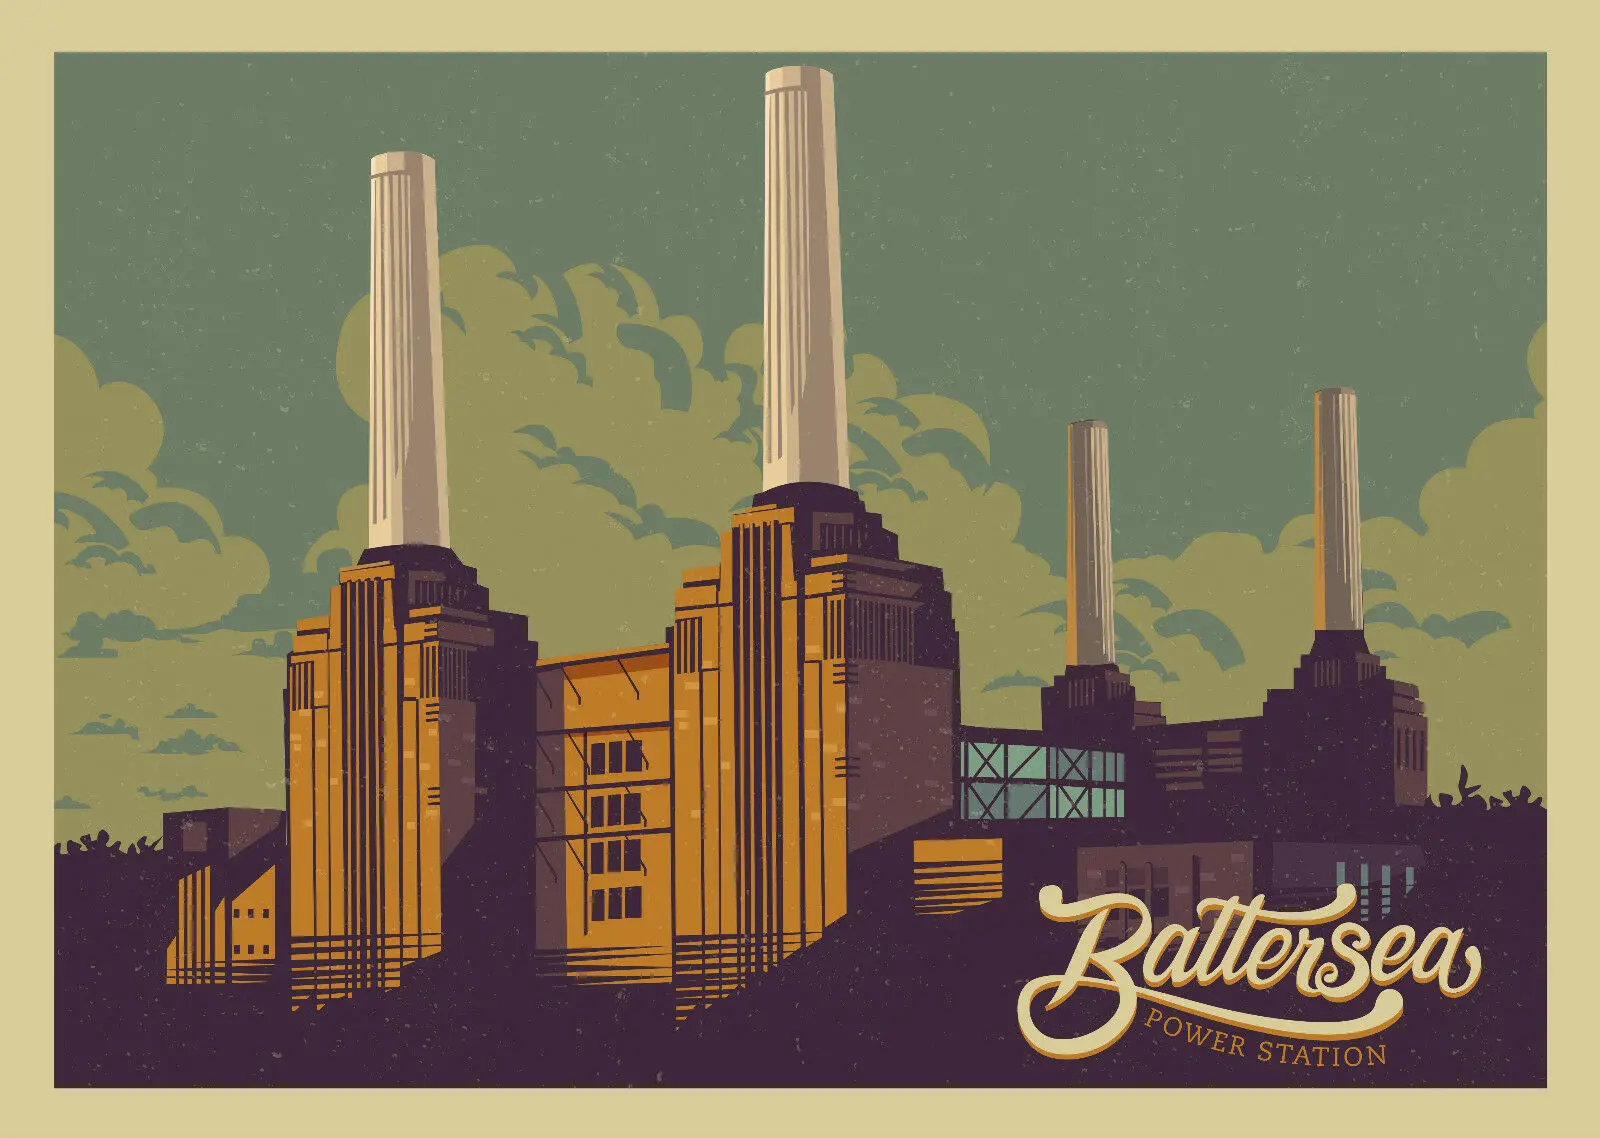 

BATTERSEA POWER STATION VINTAGE TRAVEL Photo Art Film Print Silk Poster for Your Home Wall Decor 24x36inch